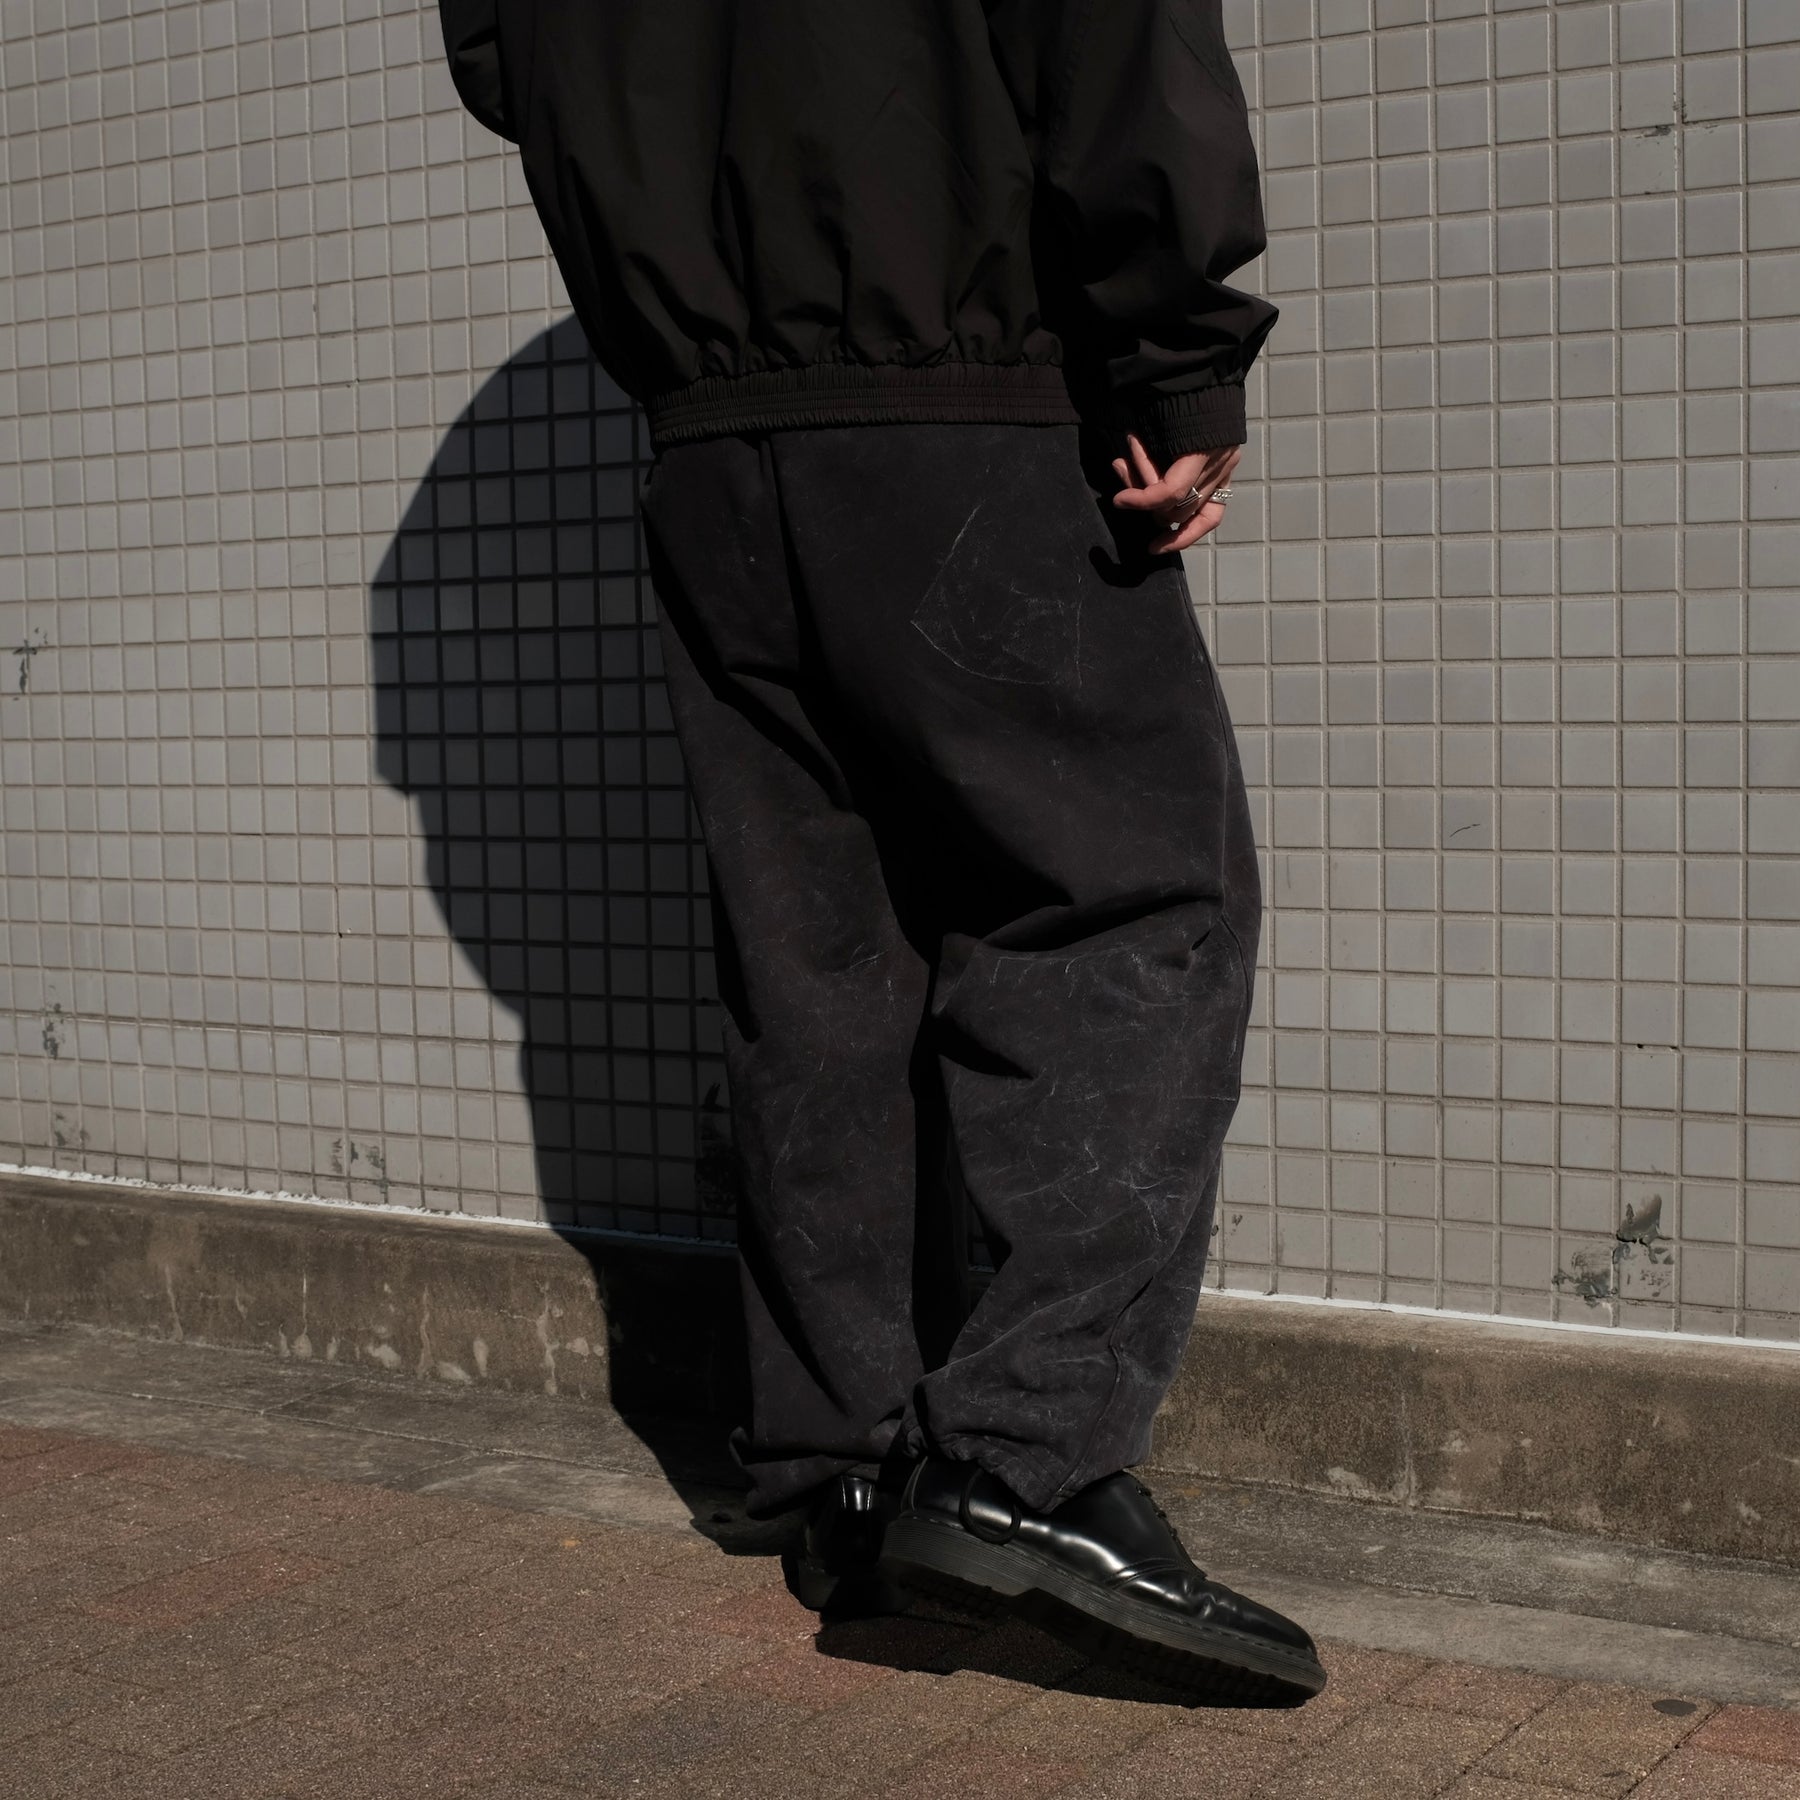 WILLY CHAVARRIA / NORTHSIDER JOGGER PANTS WASHED BLACK